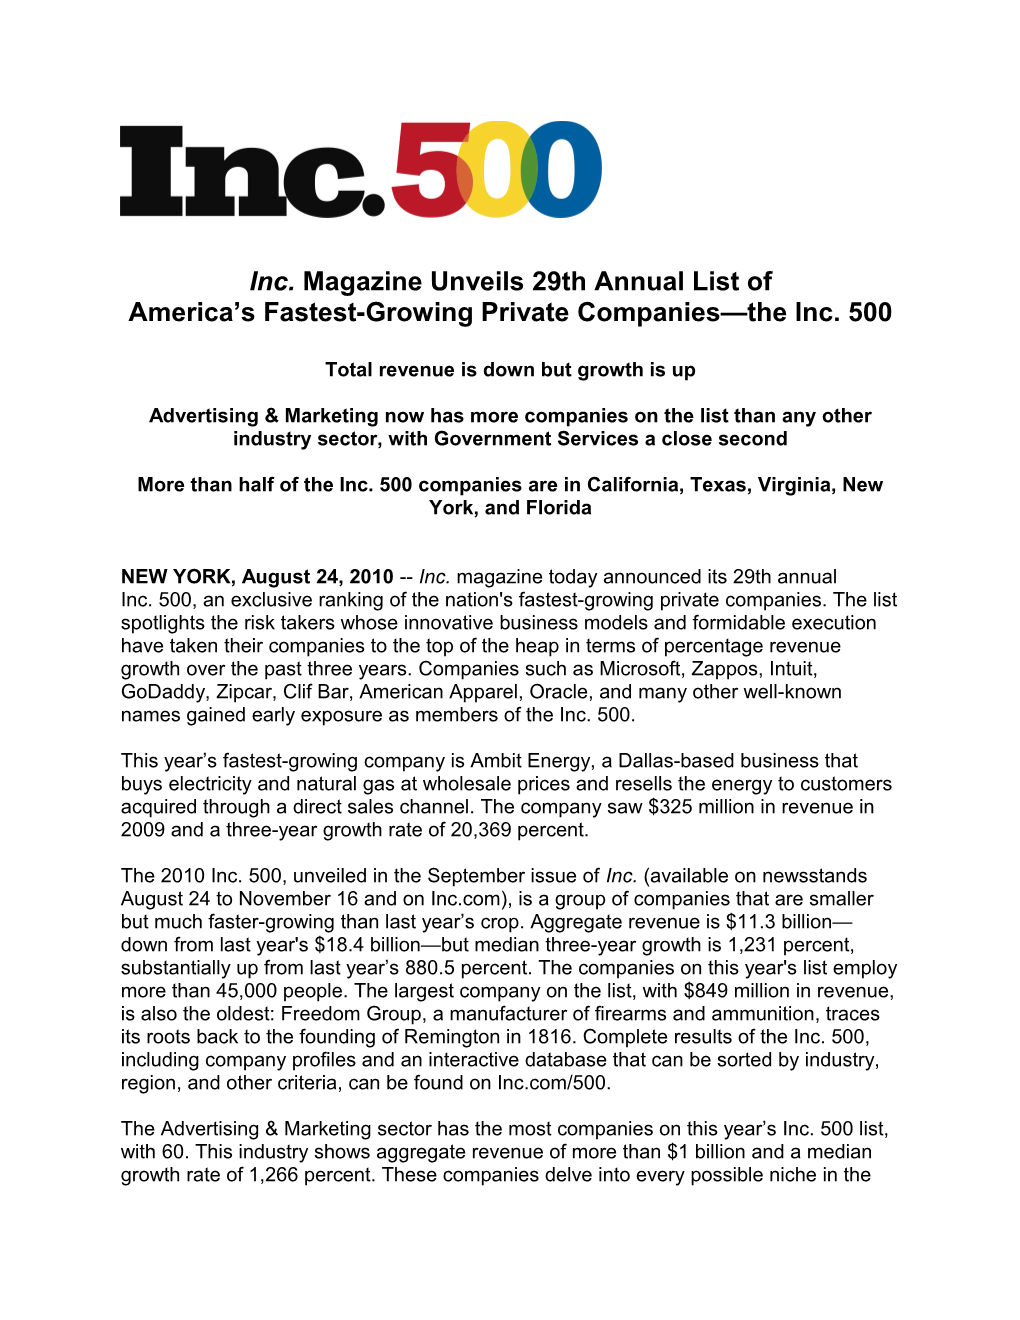 America S Fastest-Growing Private Companies the Inc. 500